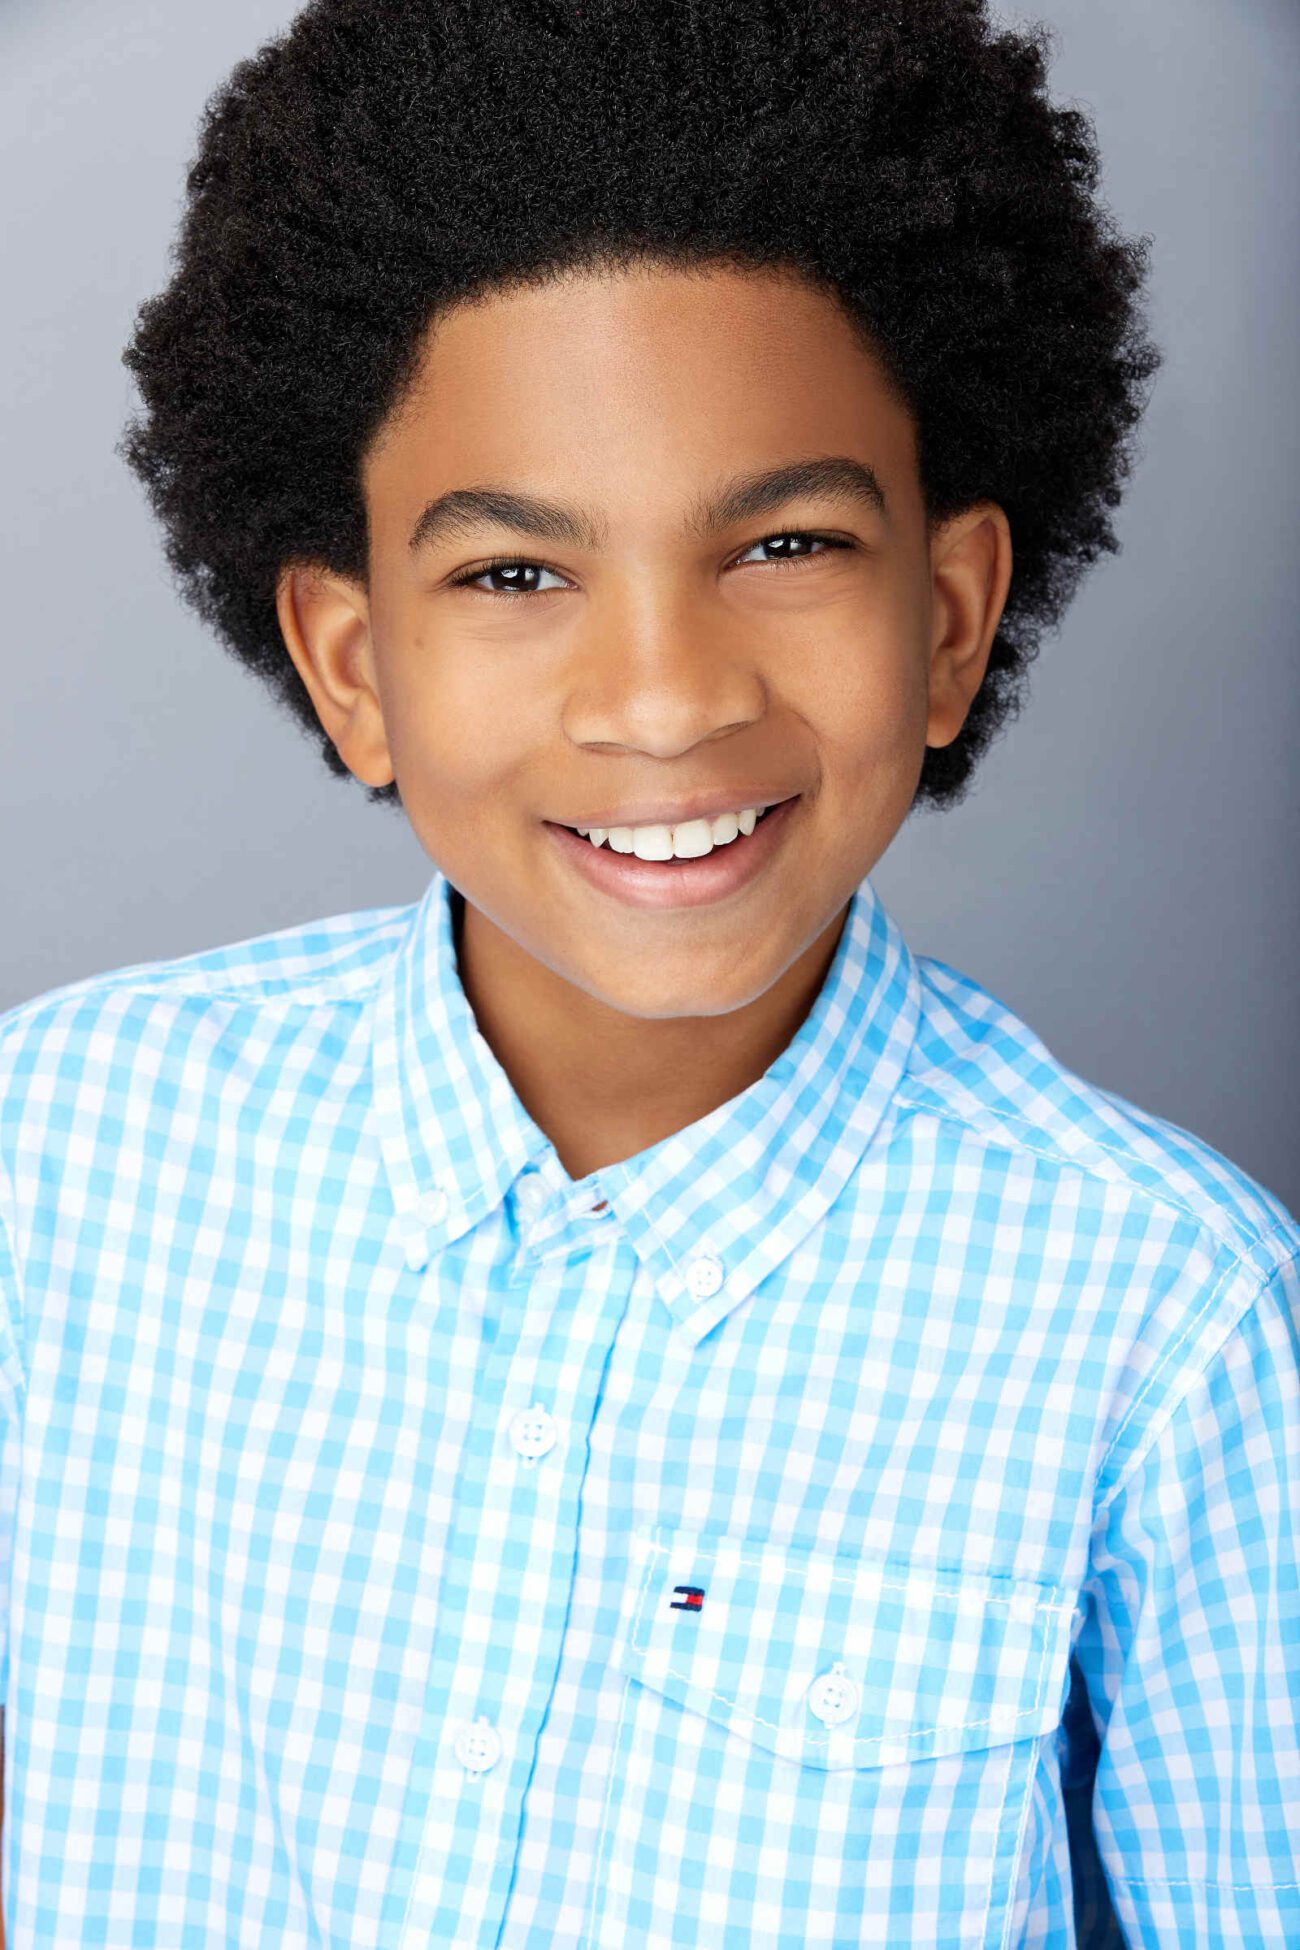 From 'Niko and the Sword of Light' to 'Cheaper by the Dozen', take notes as you learn more about the incredible journey of actor Andre Robinson!